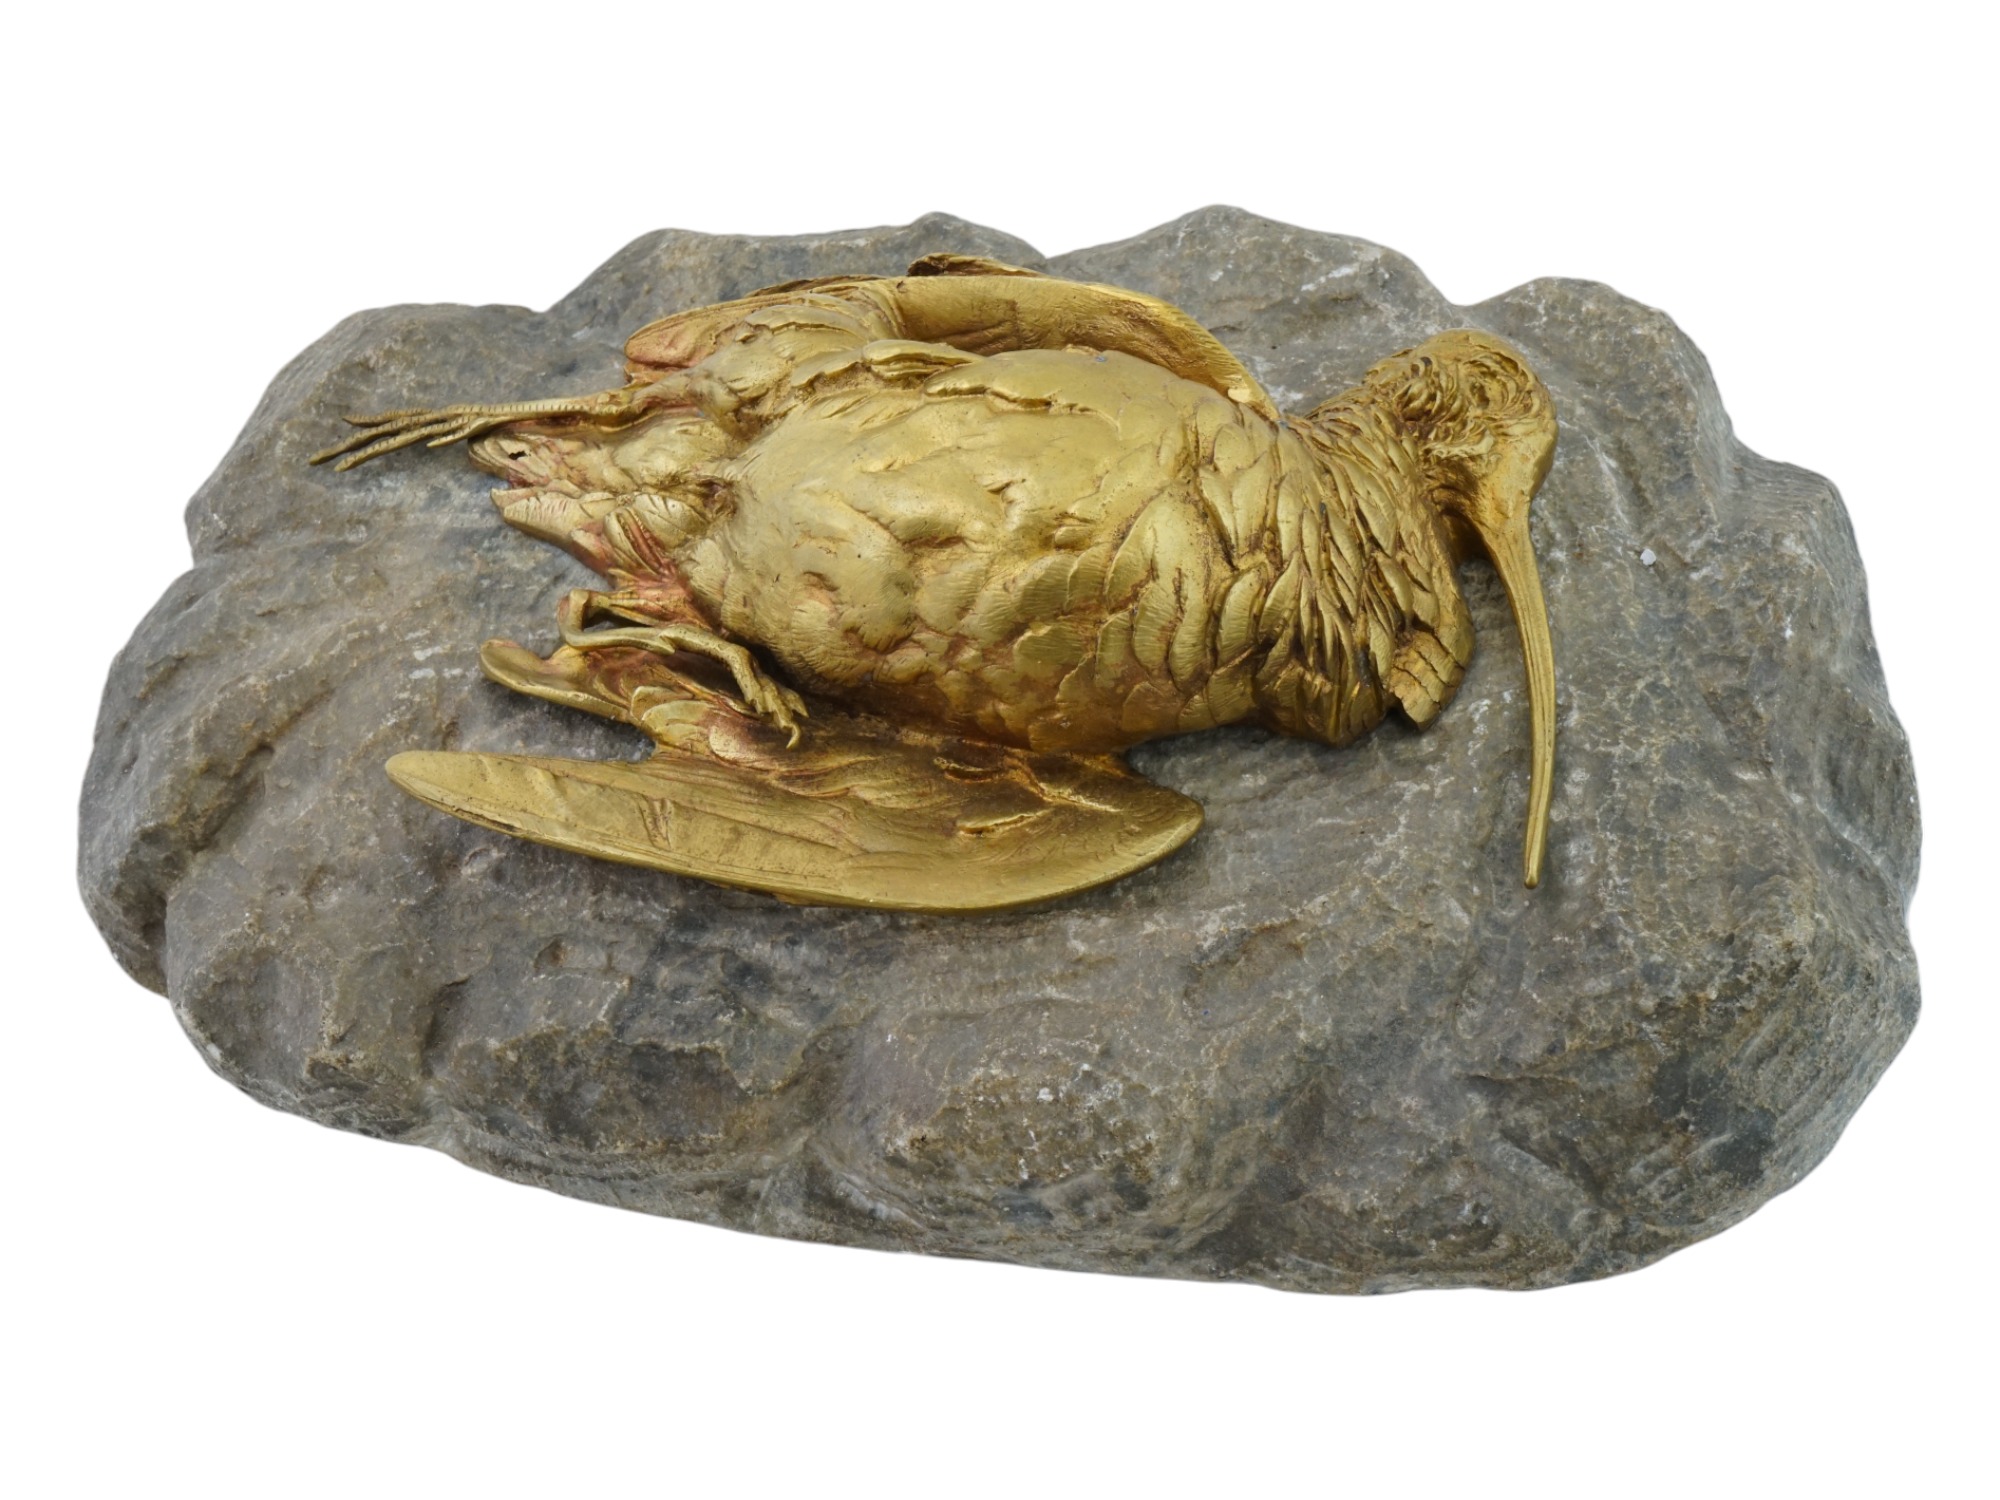 VINTAGE BRONZE SCULPTURE OF A DECEASED BIRD ON STONE PIC-0